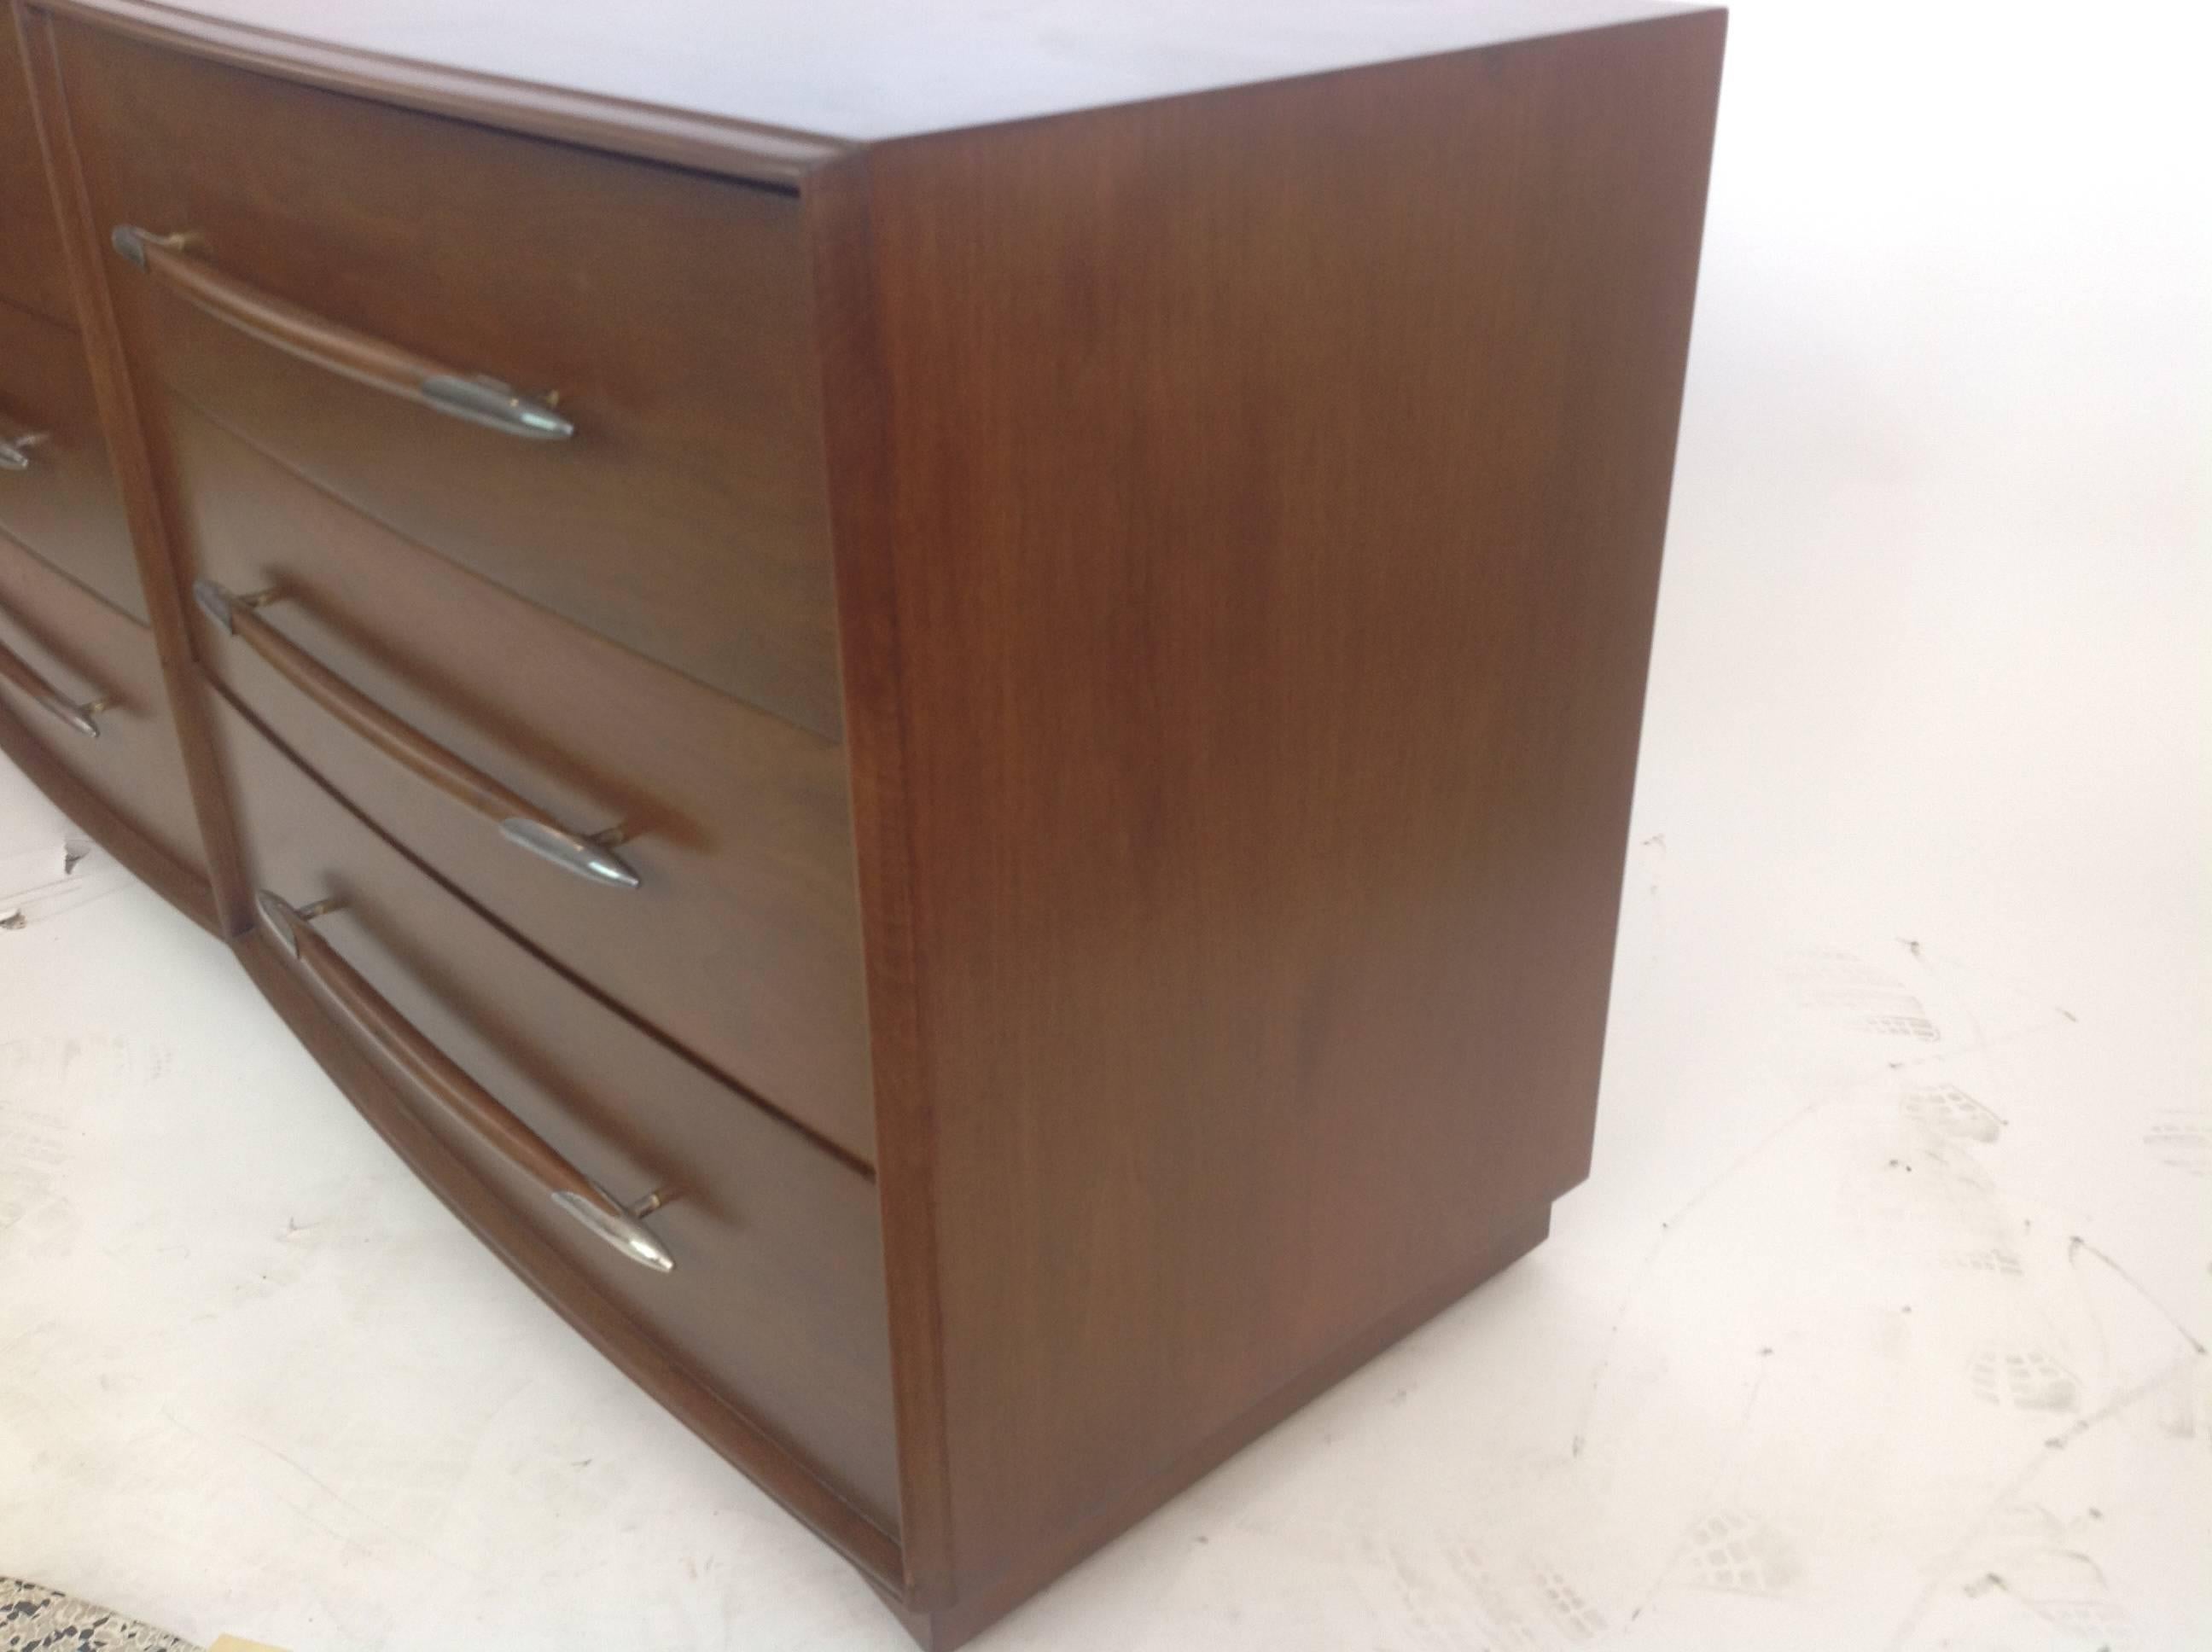 Fantastic side by side dresser or chest of drawers fashioned in mahogany with the same mahogany linear drawer pulls which terminate with metal atomic tips. Top drawers are galleried and interior is very clean, this dresser was refinished perfectly